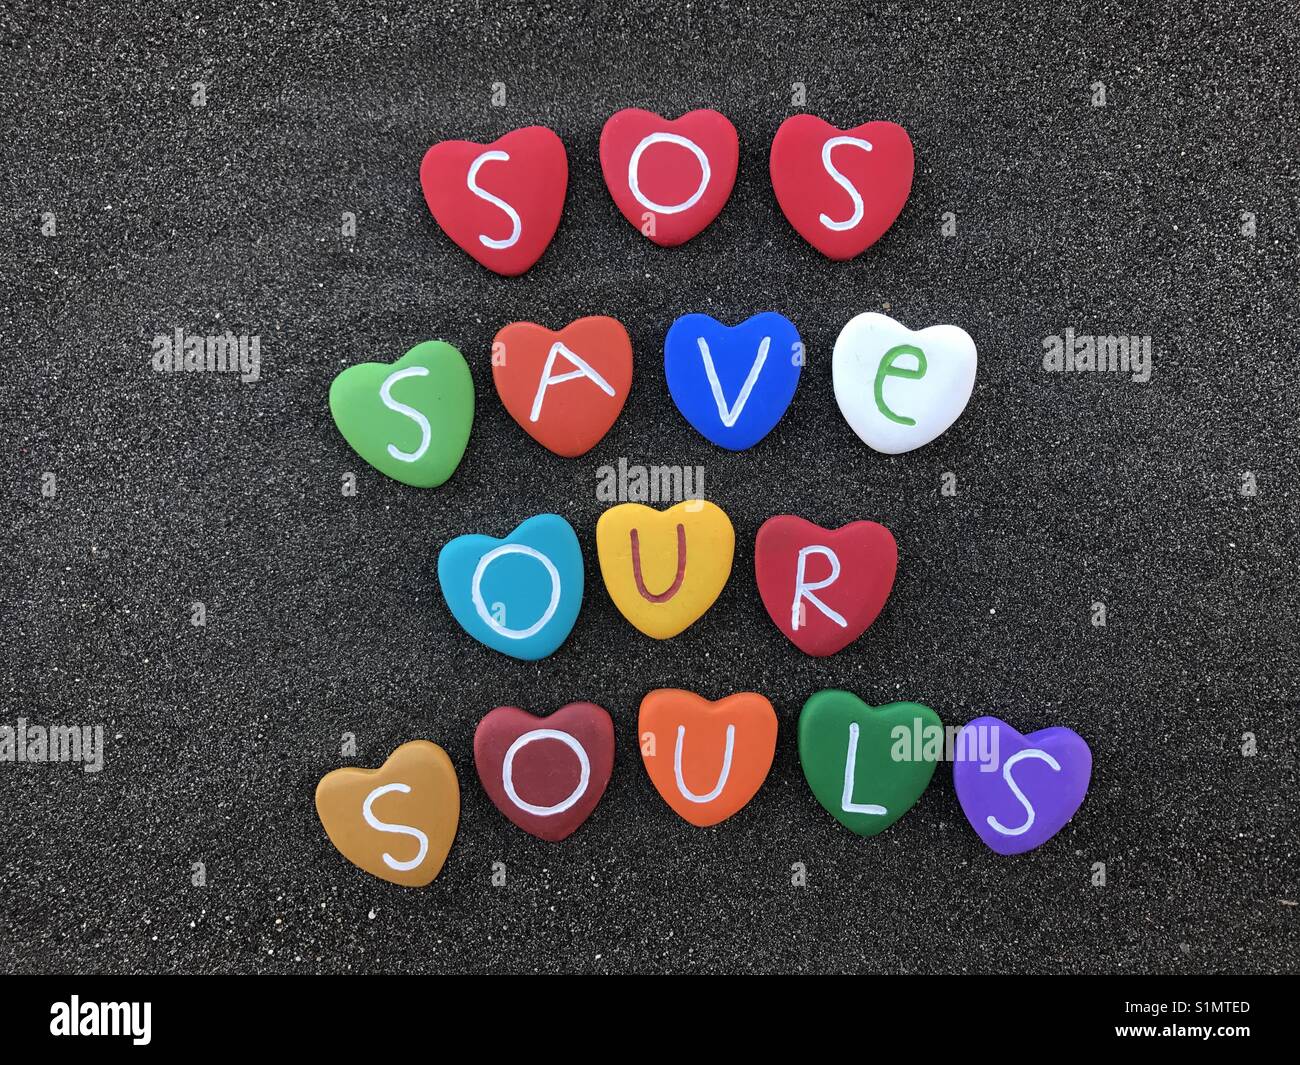 Sos Save Our Souls International Morse Code Distress Signal With